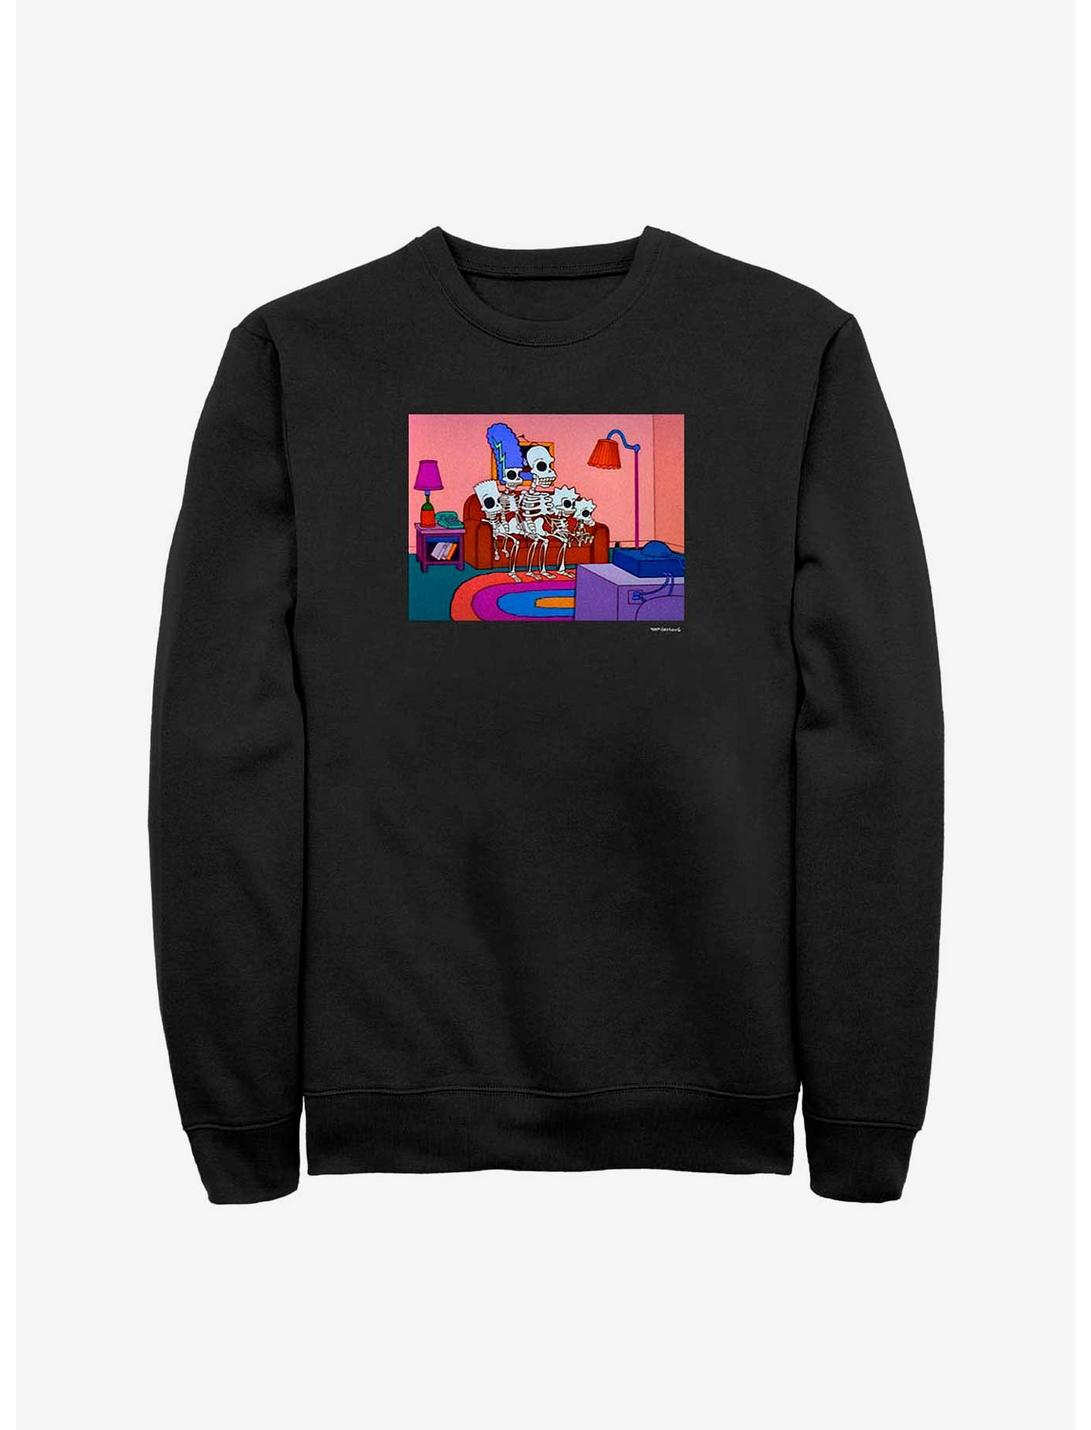 The Simpsons Treehouse Of Horror Intro Couch Sweatshirt, BLACK, hi-res